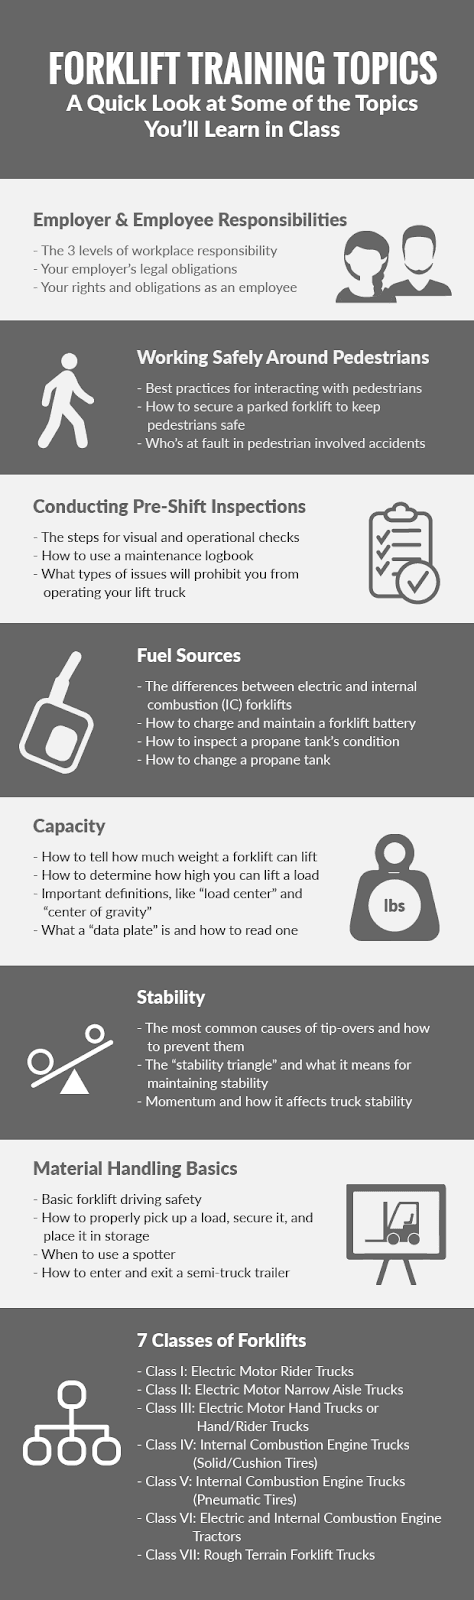 Forklift training topics infographic